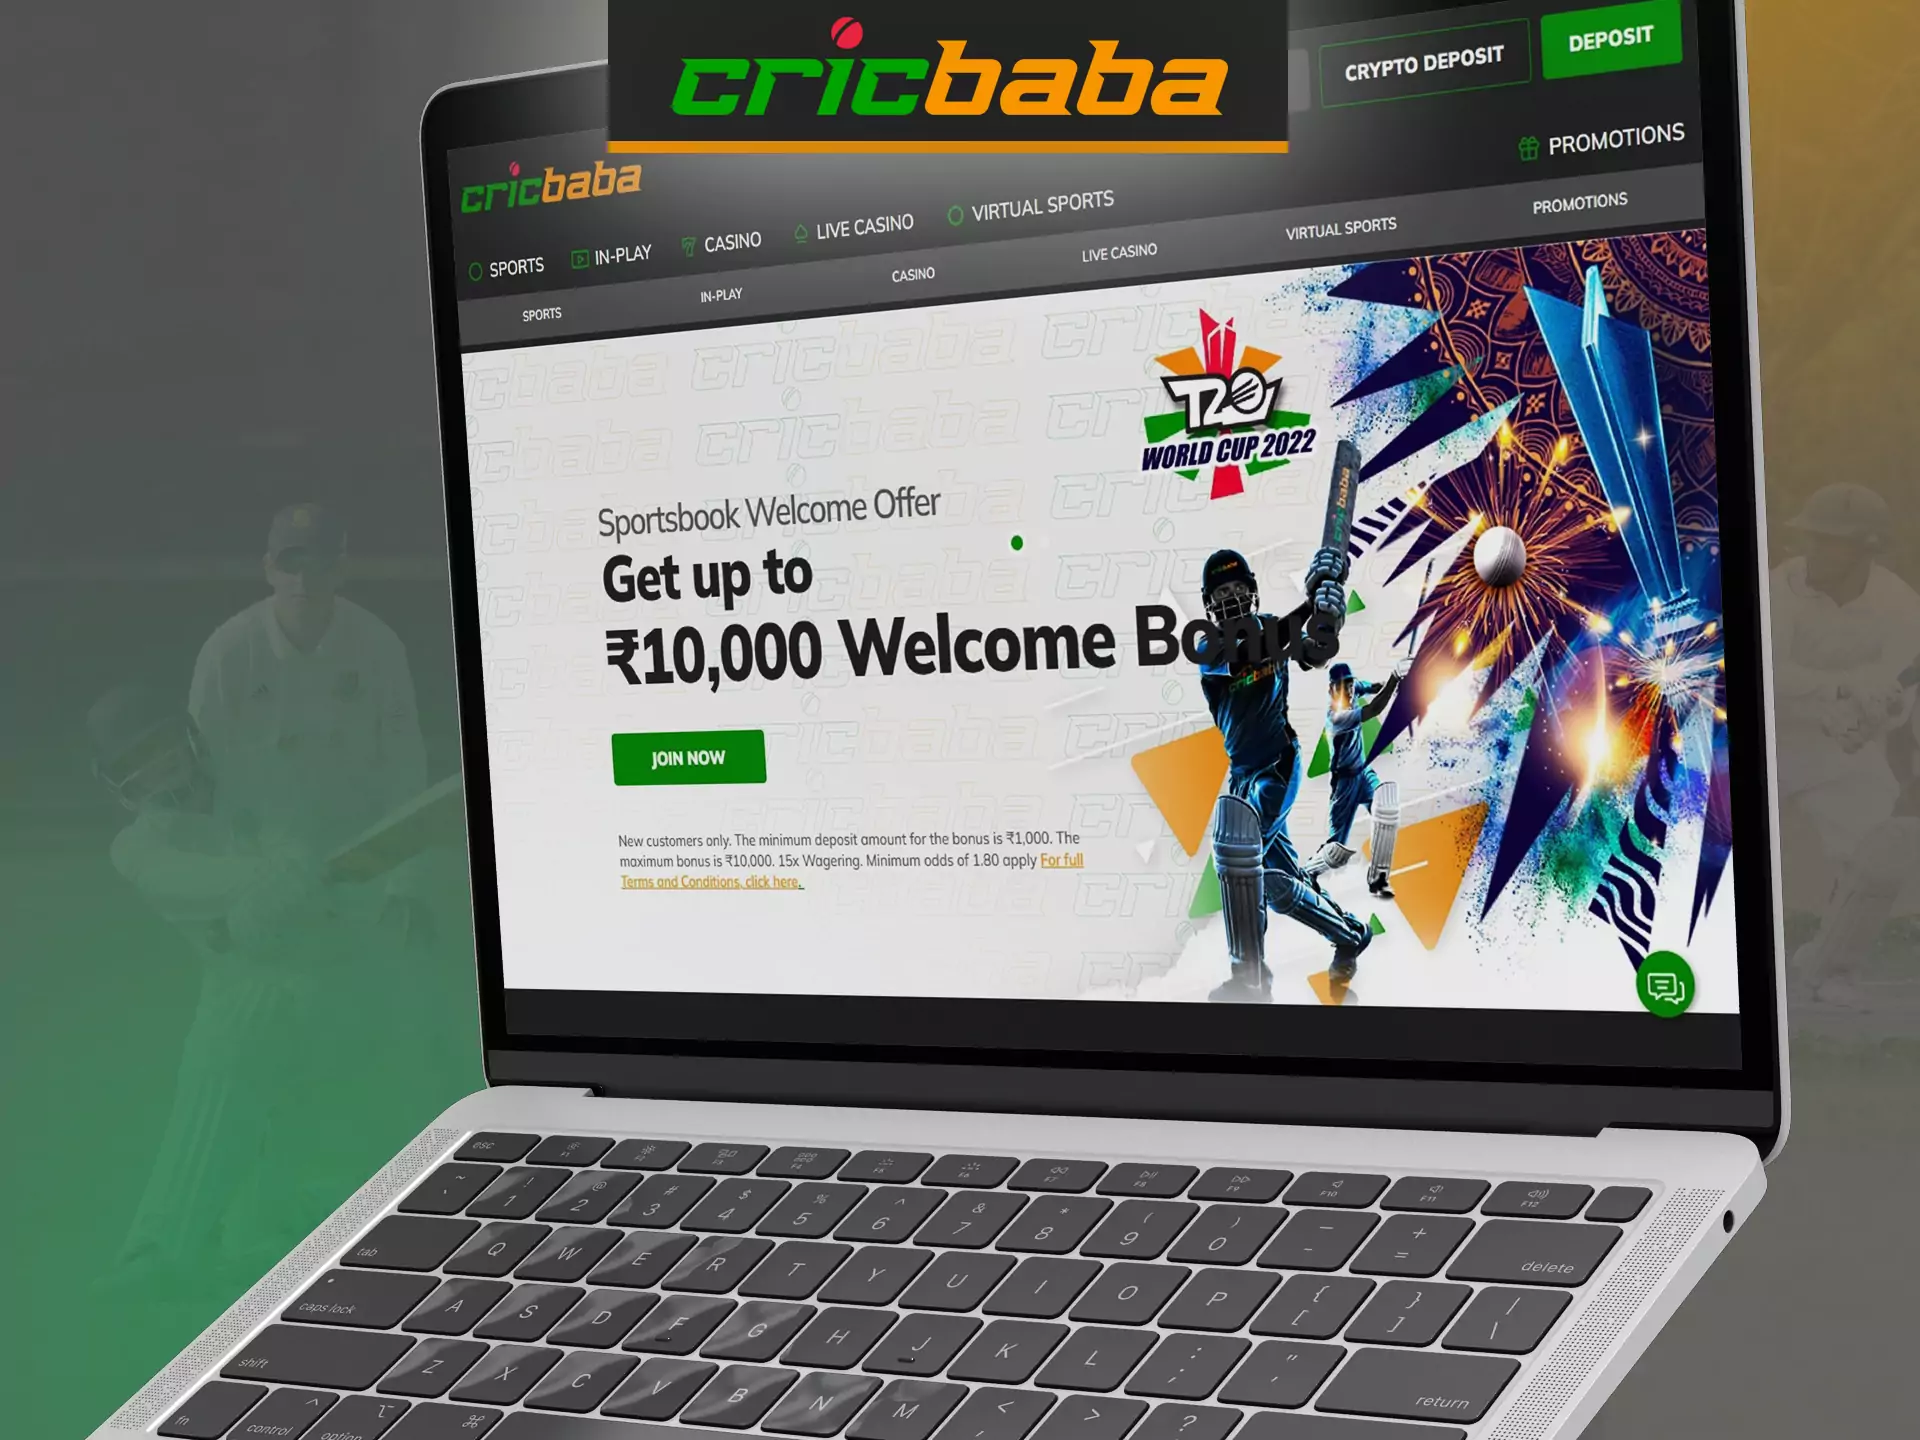 The official website of Cricbaba offers many functions and a comfortable intuitive interface.